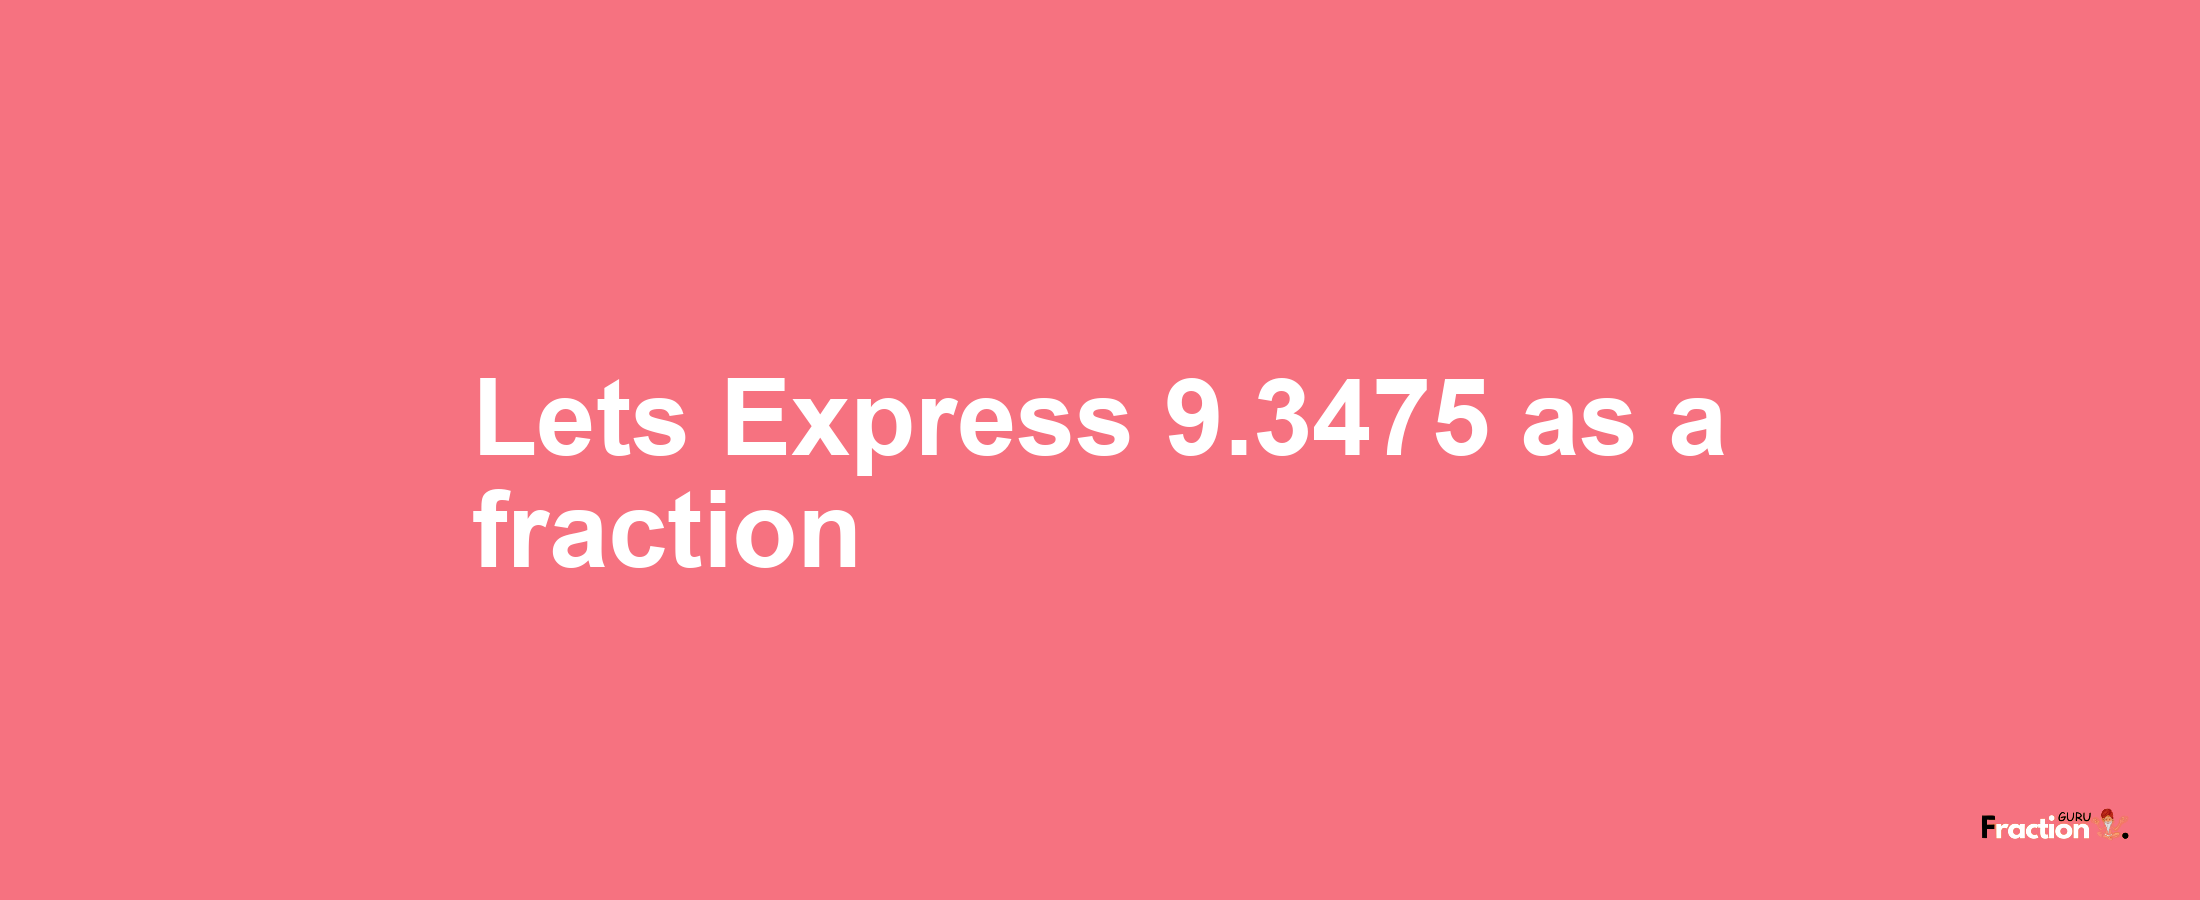 Lets Express 9.3475 as afraction